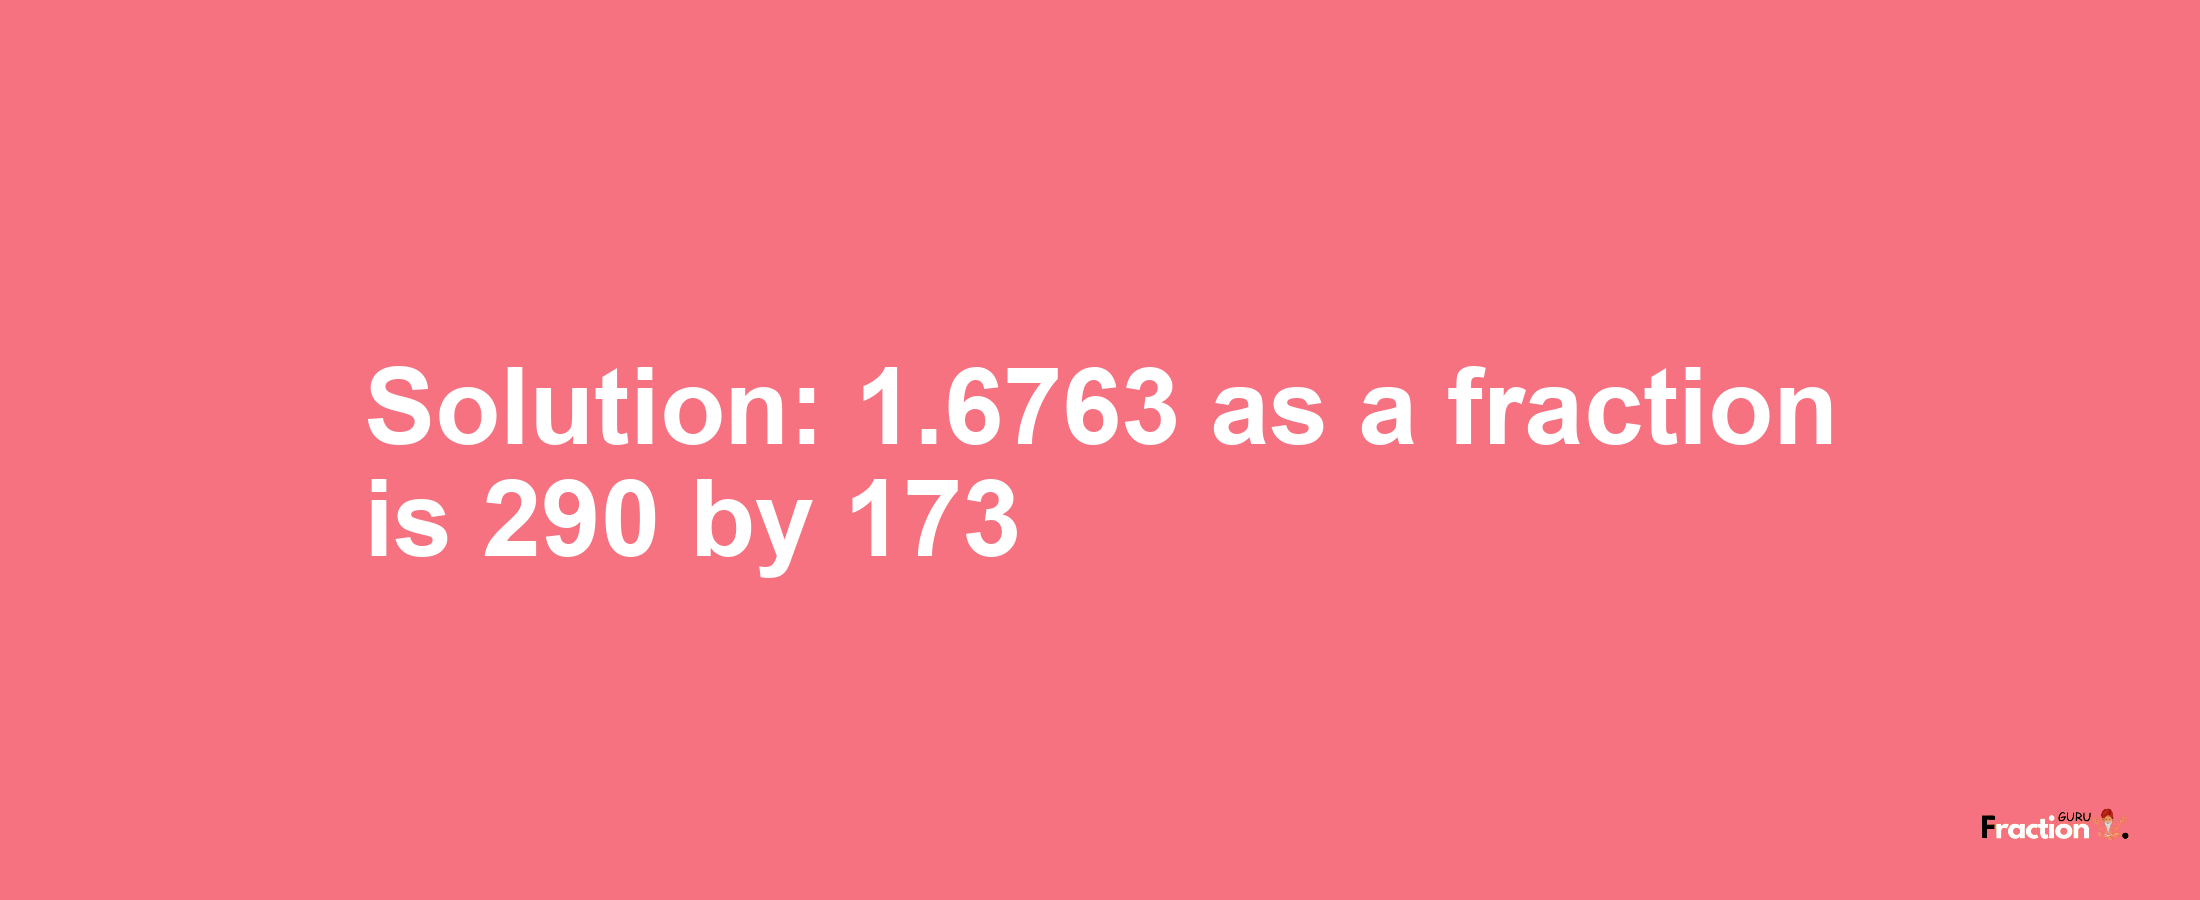 Solution:1.6763 as a fraction is 290/173